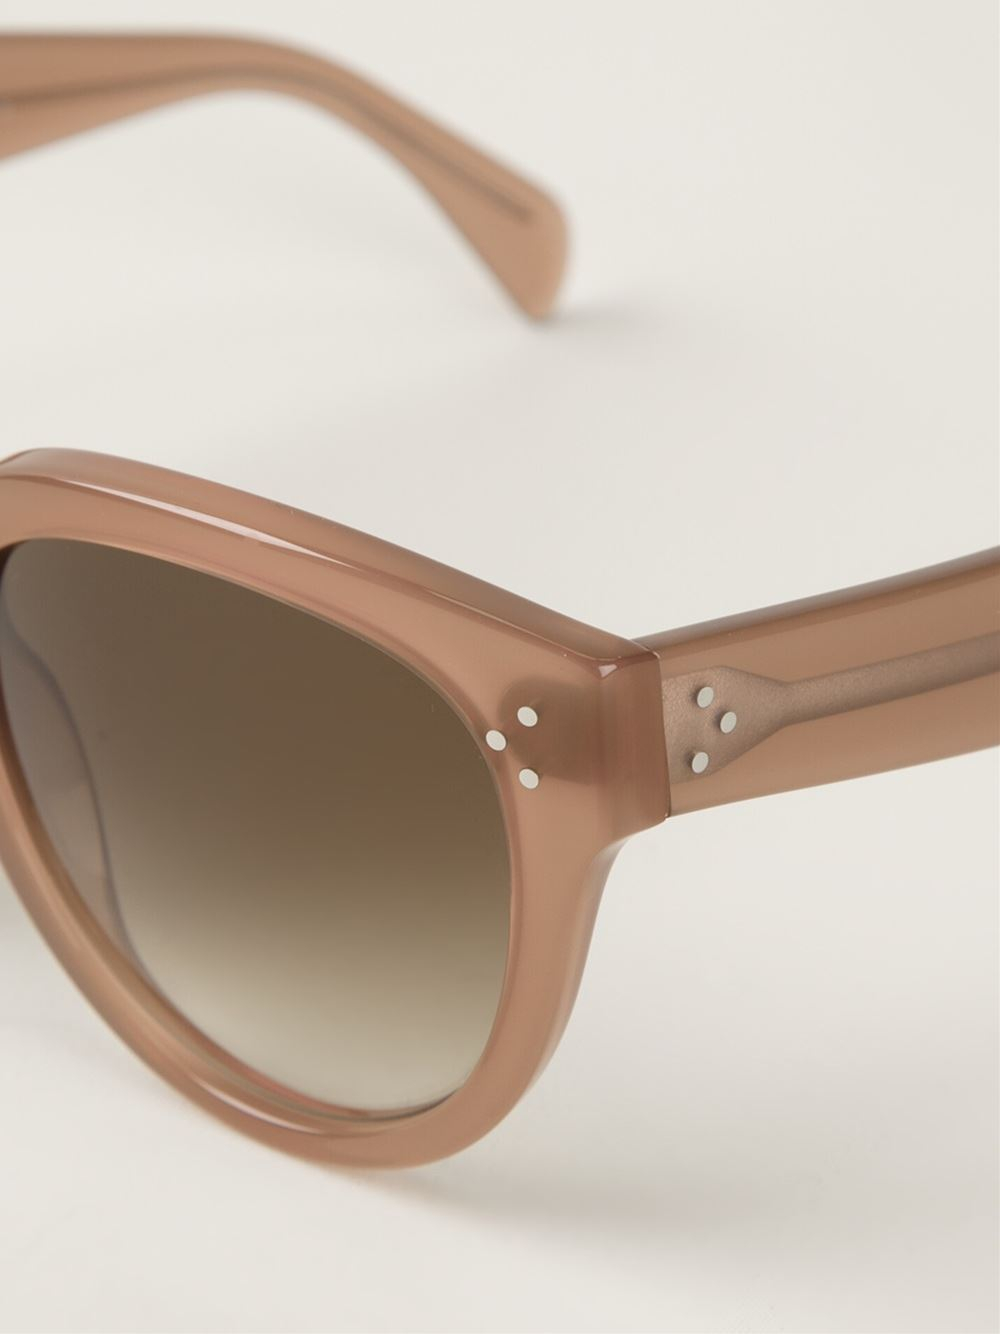 Celine Audrey Sunglasses in Natural | Lyst